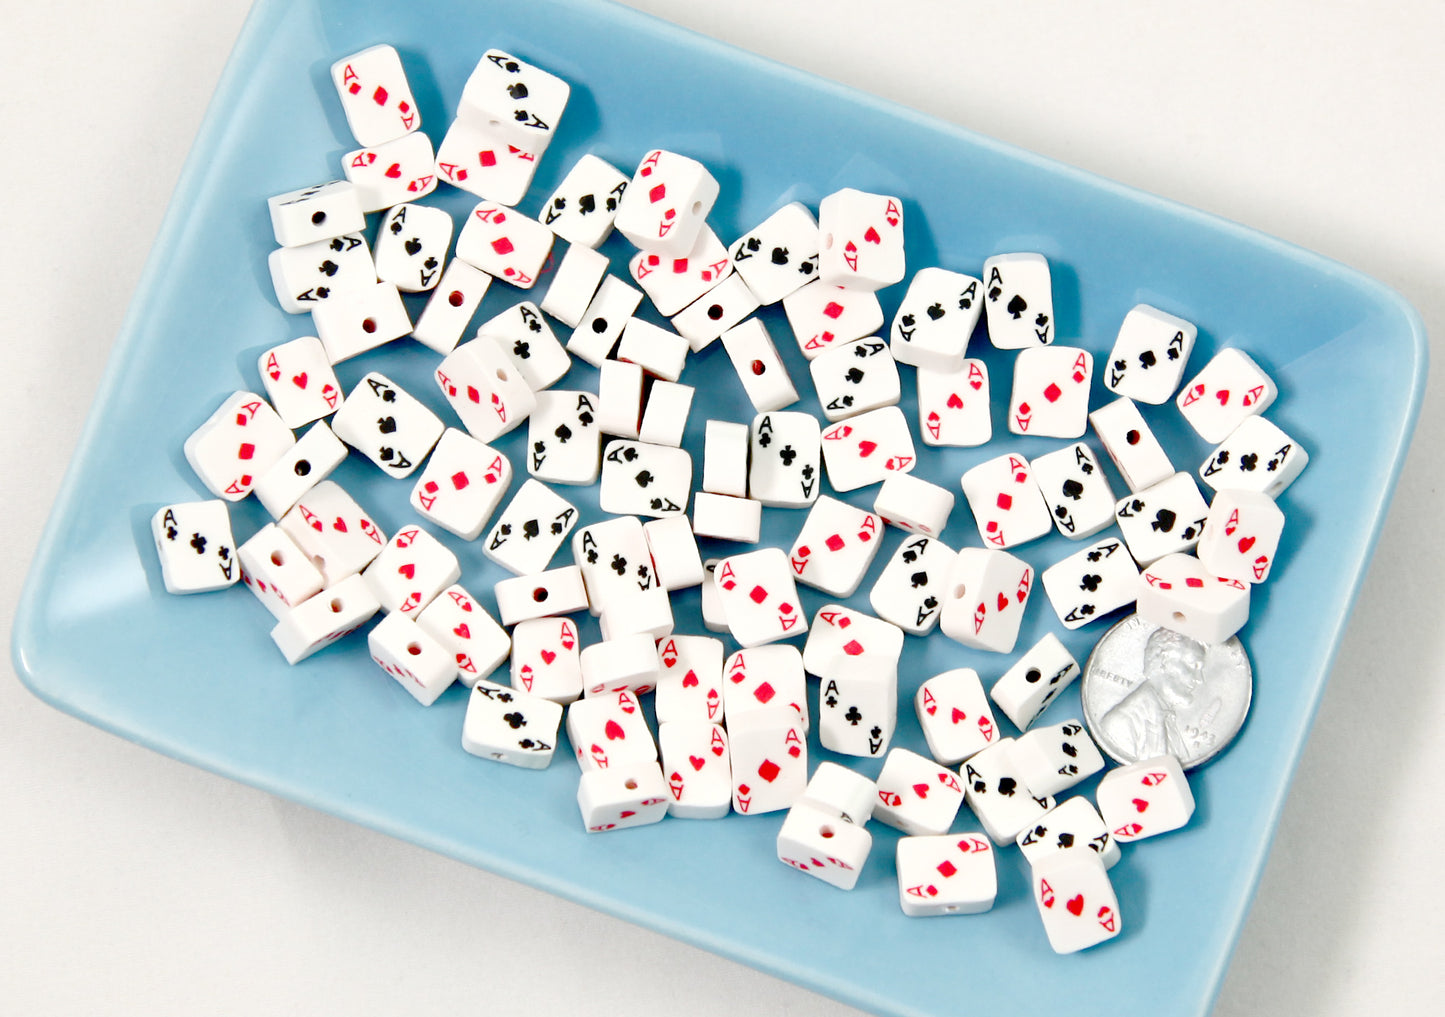 Playing Card Beads - 9mm Ace Card Suit Shape Poker Bead Fimo or Polymer Clay Beads - 50 pc set